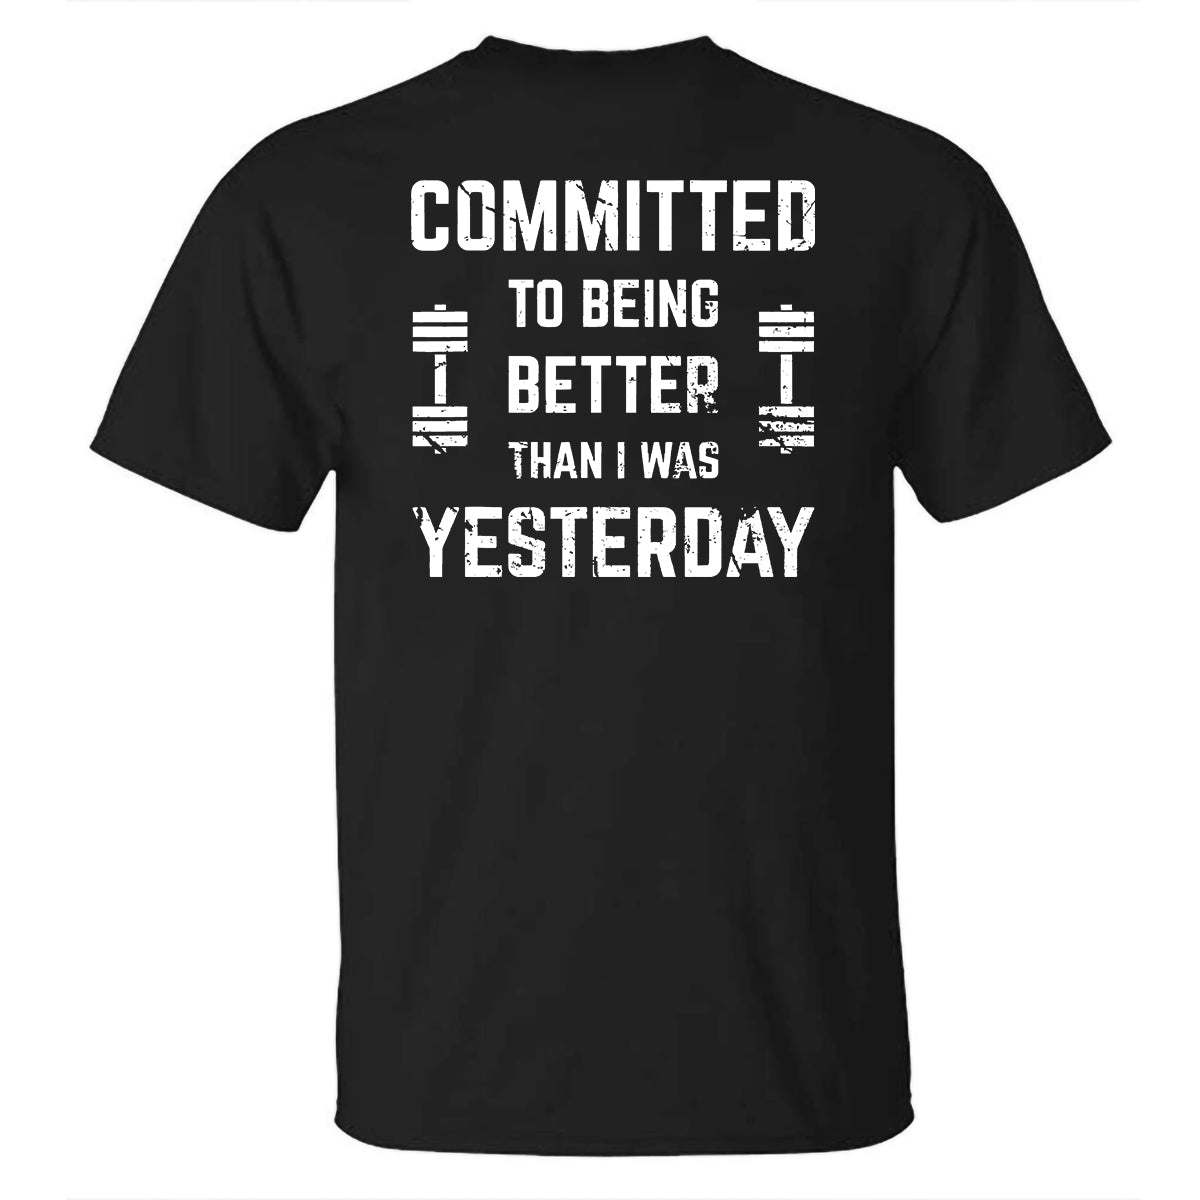 Committed To Being Better Than I Was Yesterday Printed T-shirt